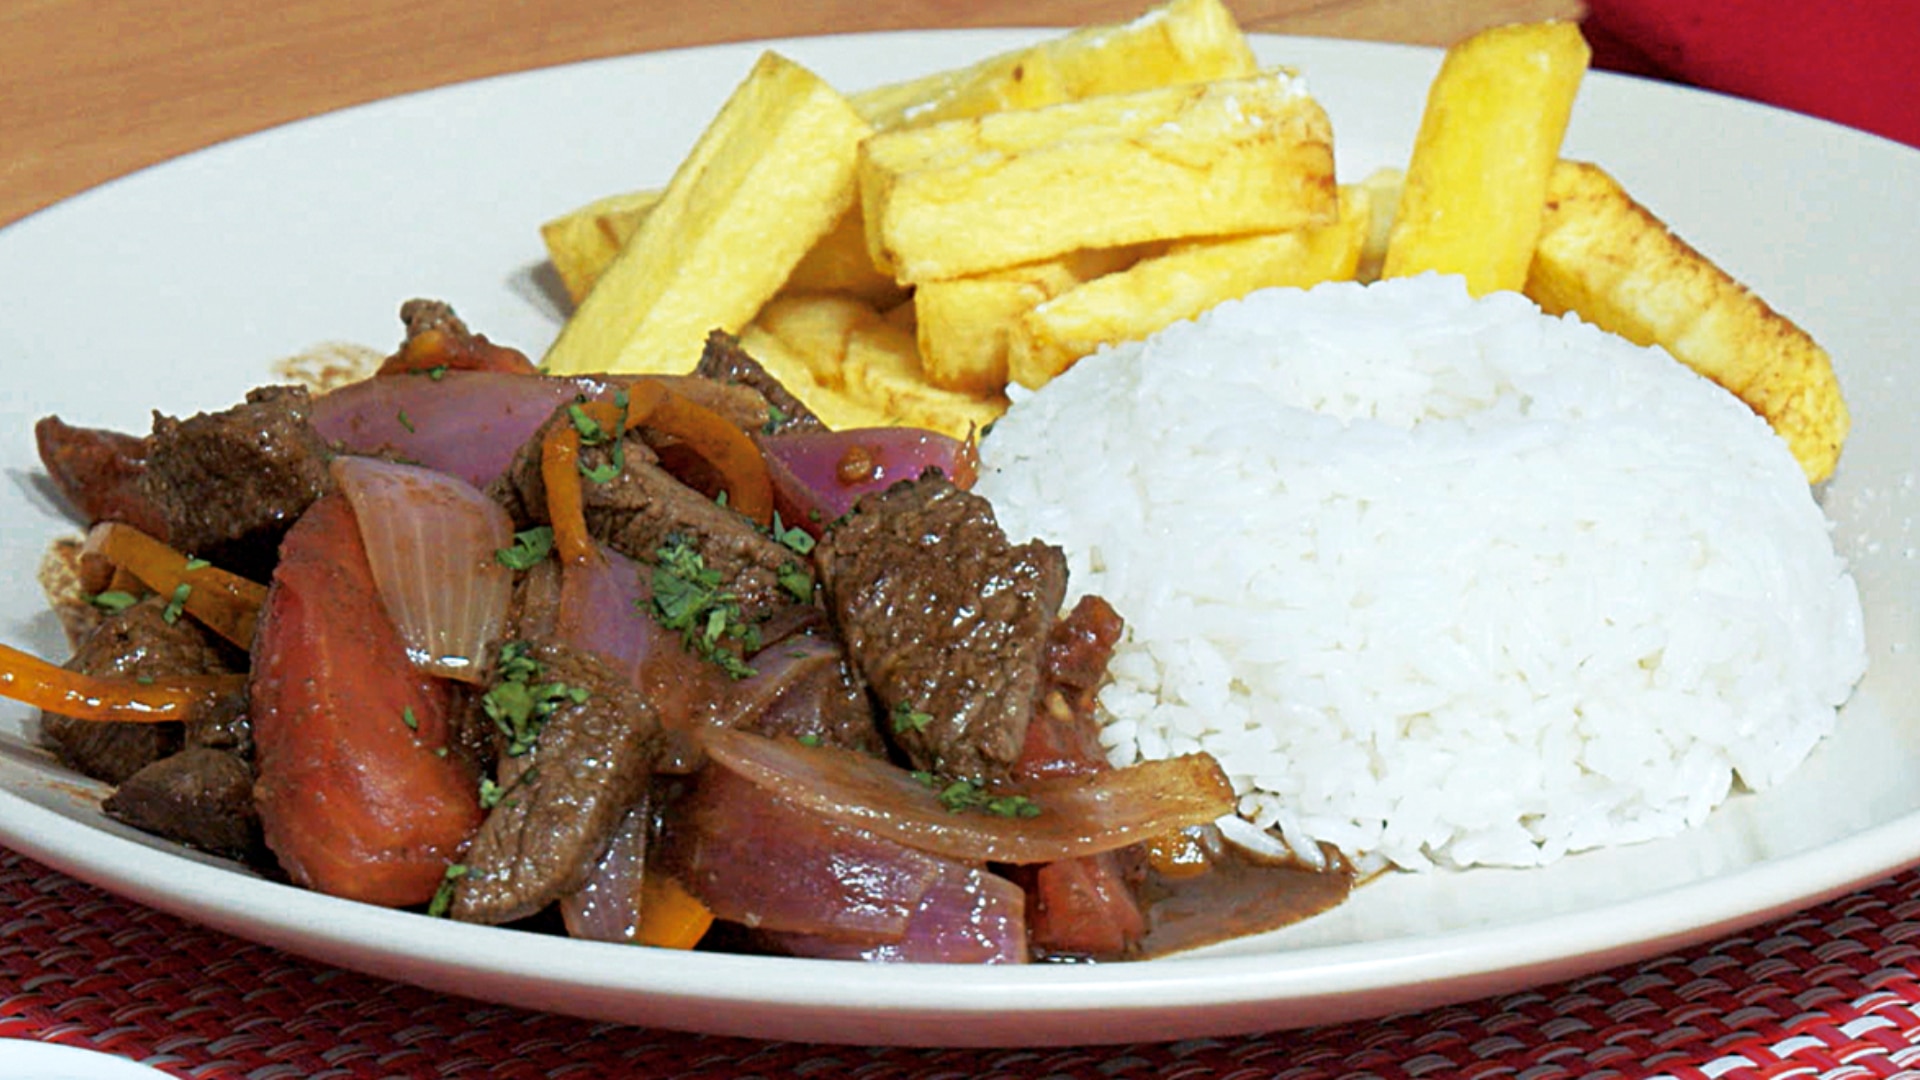 Lomo saltado, one of the most popular dishes in Peru.